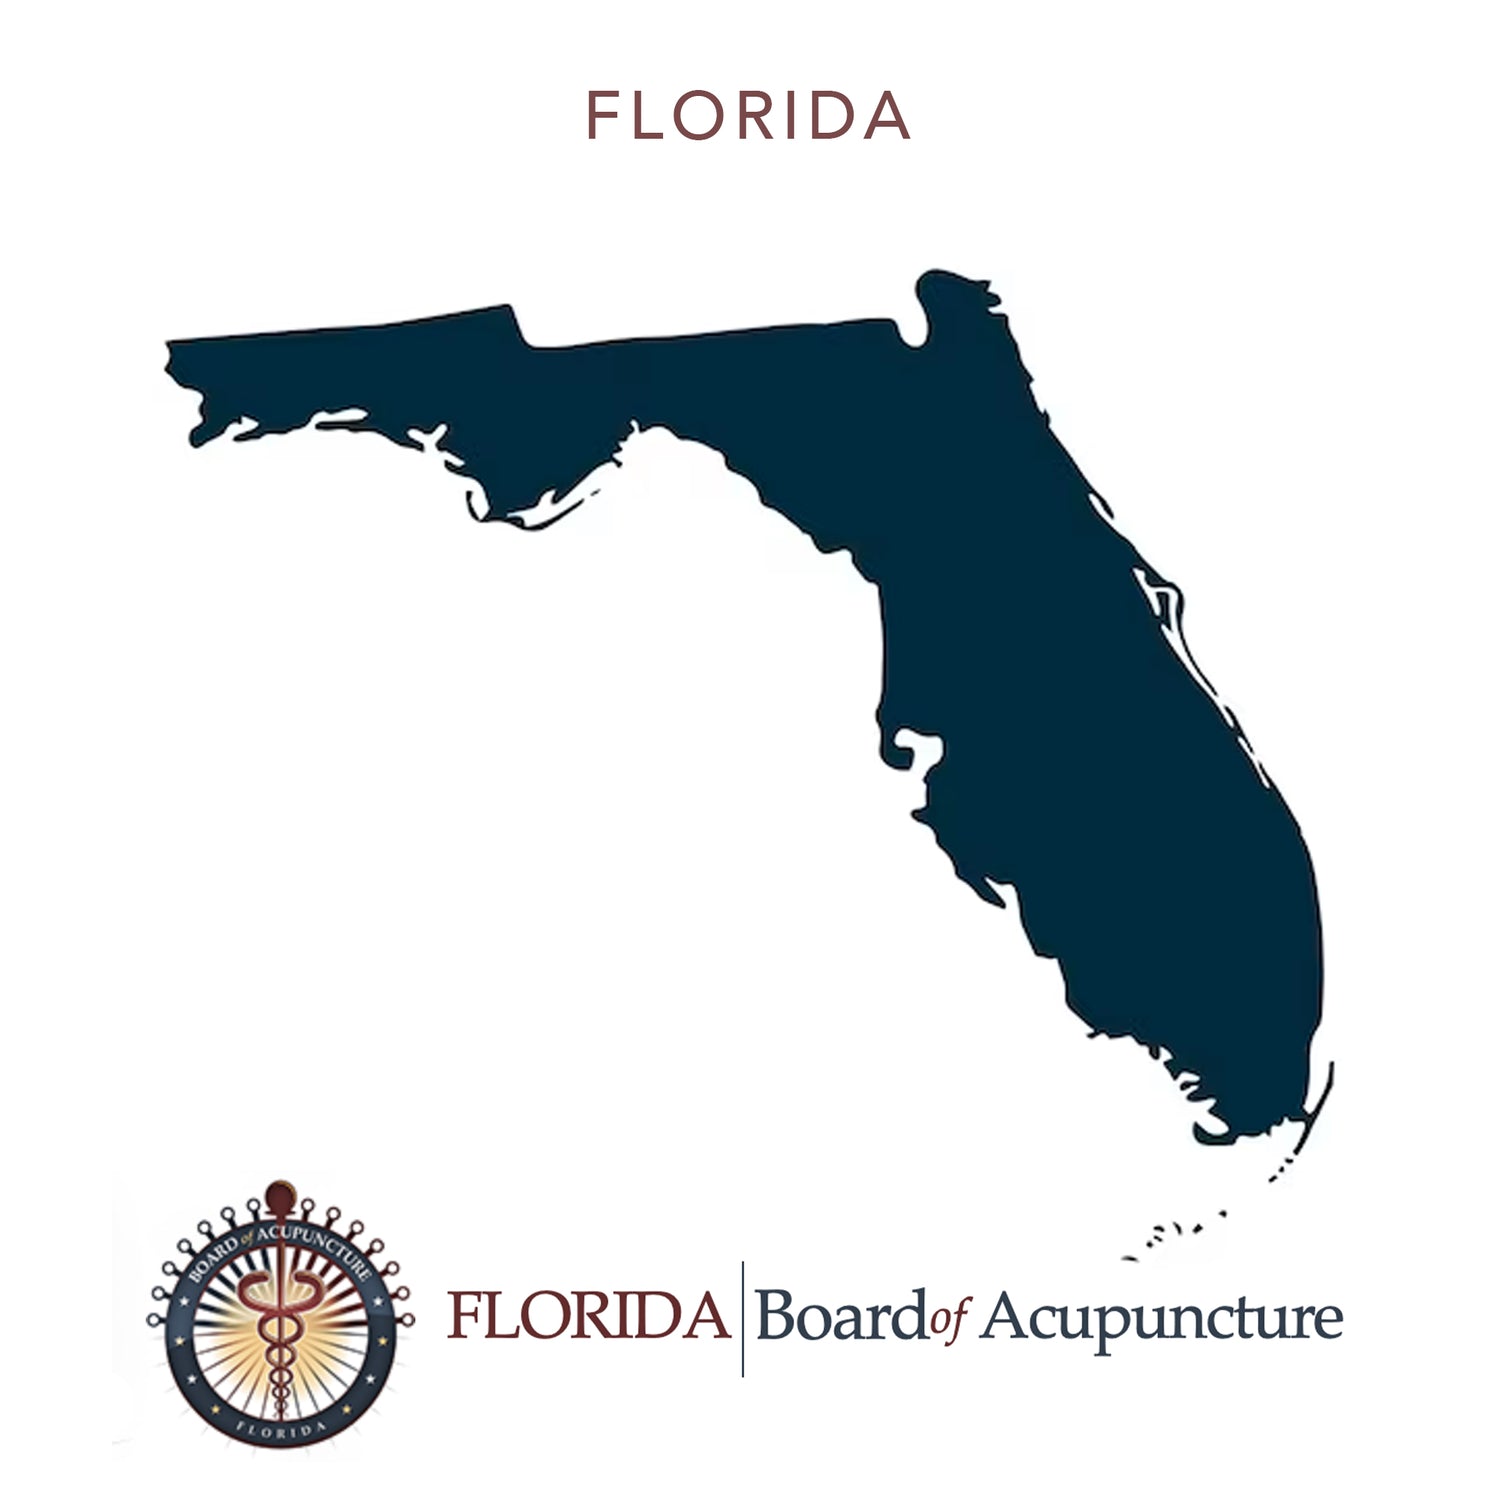 Florida Acupuncture Board Approved Acupuncture Continuing Education Courses